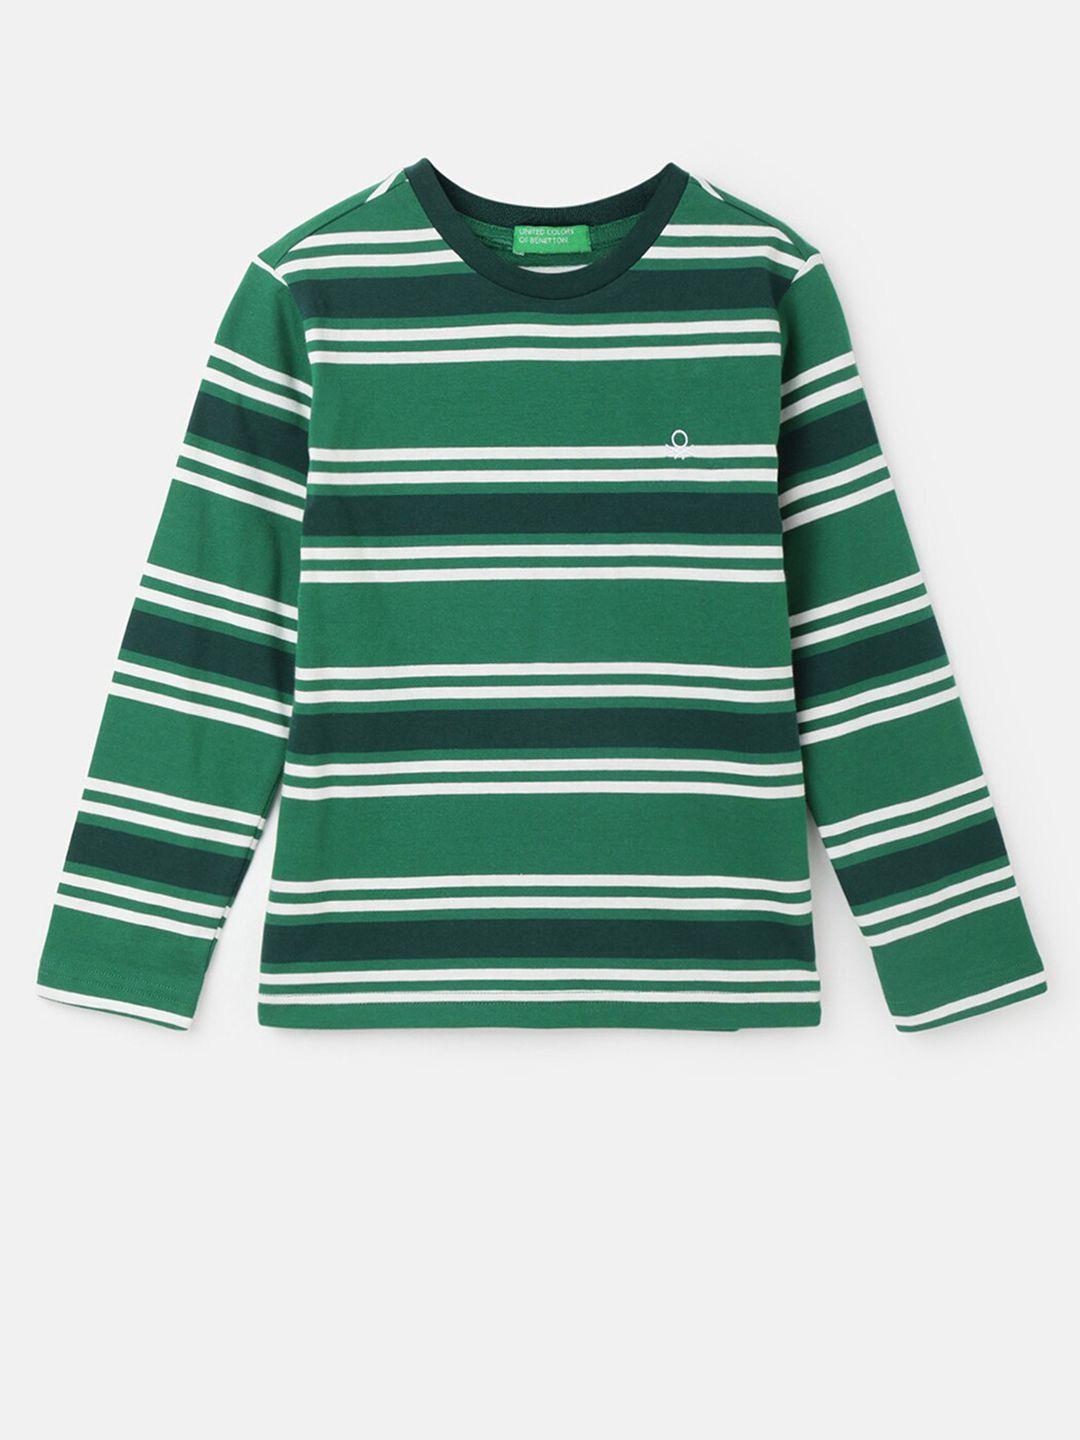 united colors of benetton boys striped cotton t-shirt